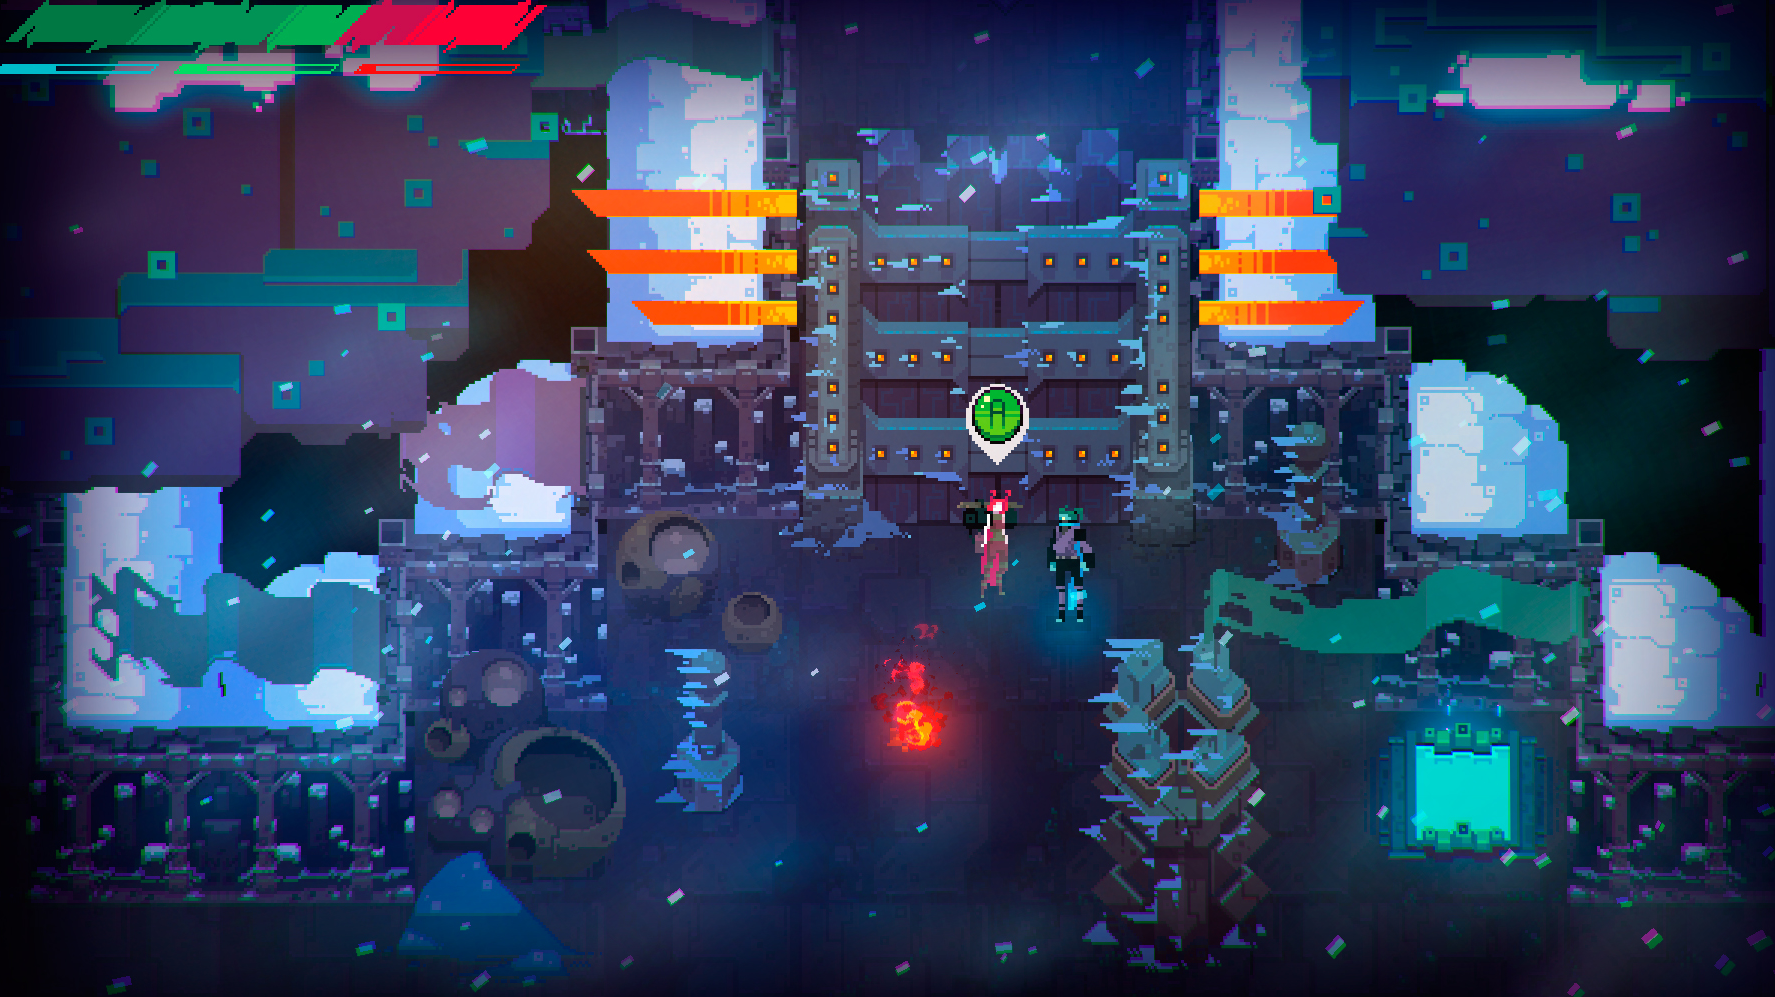 There's More To Phantom Trigger Than Just Another Beautiful Pixel Brawler